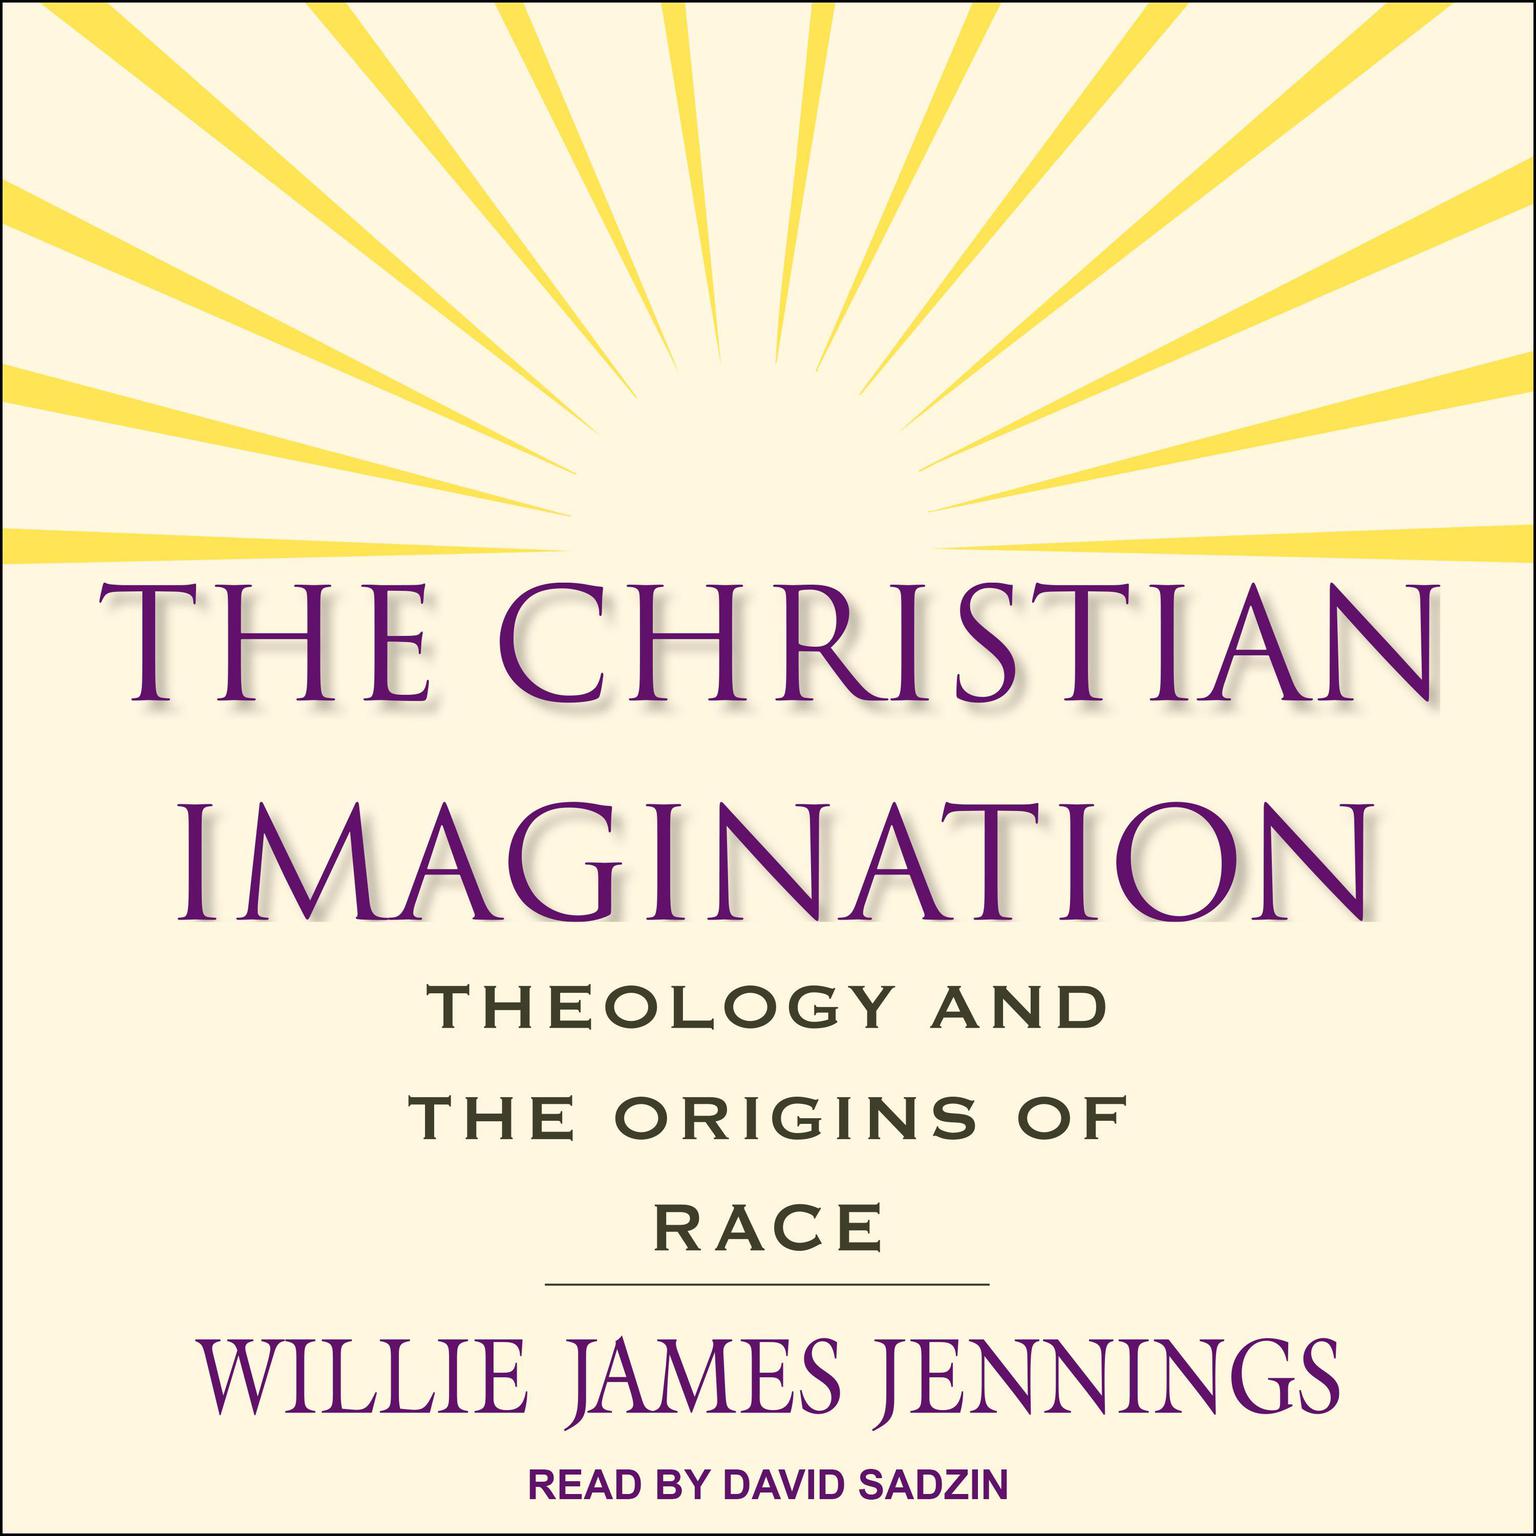 The Christian Imagination: Theology and the Origins of Race Audiobook, by Willie James Jennings